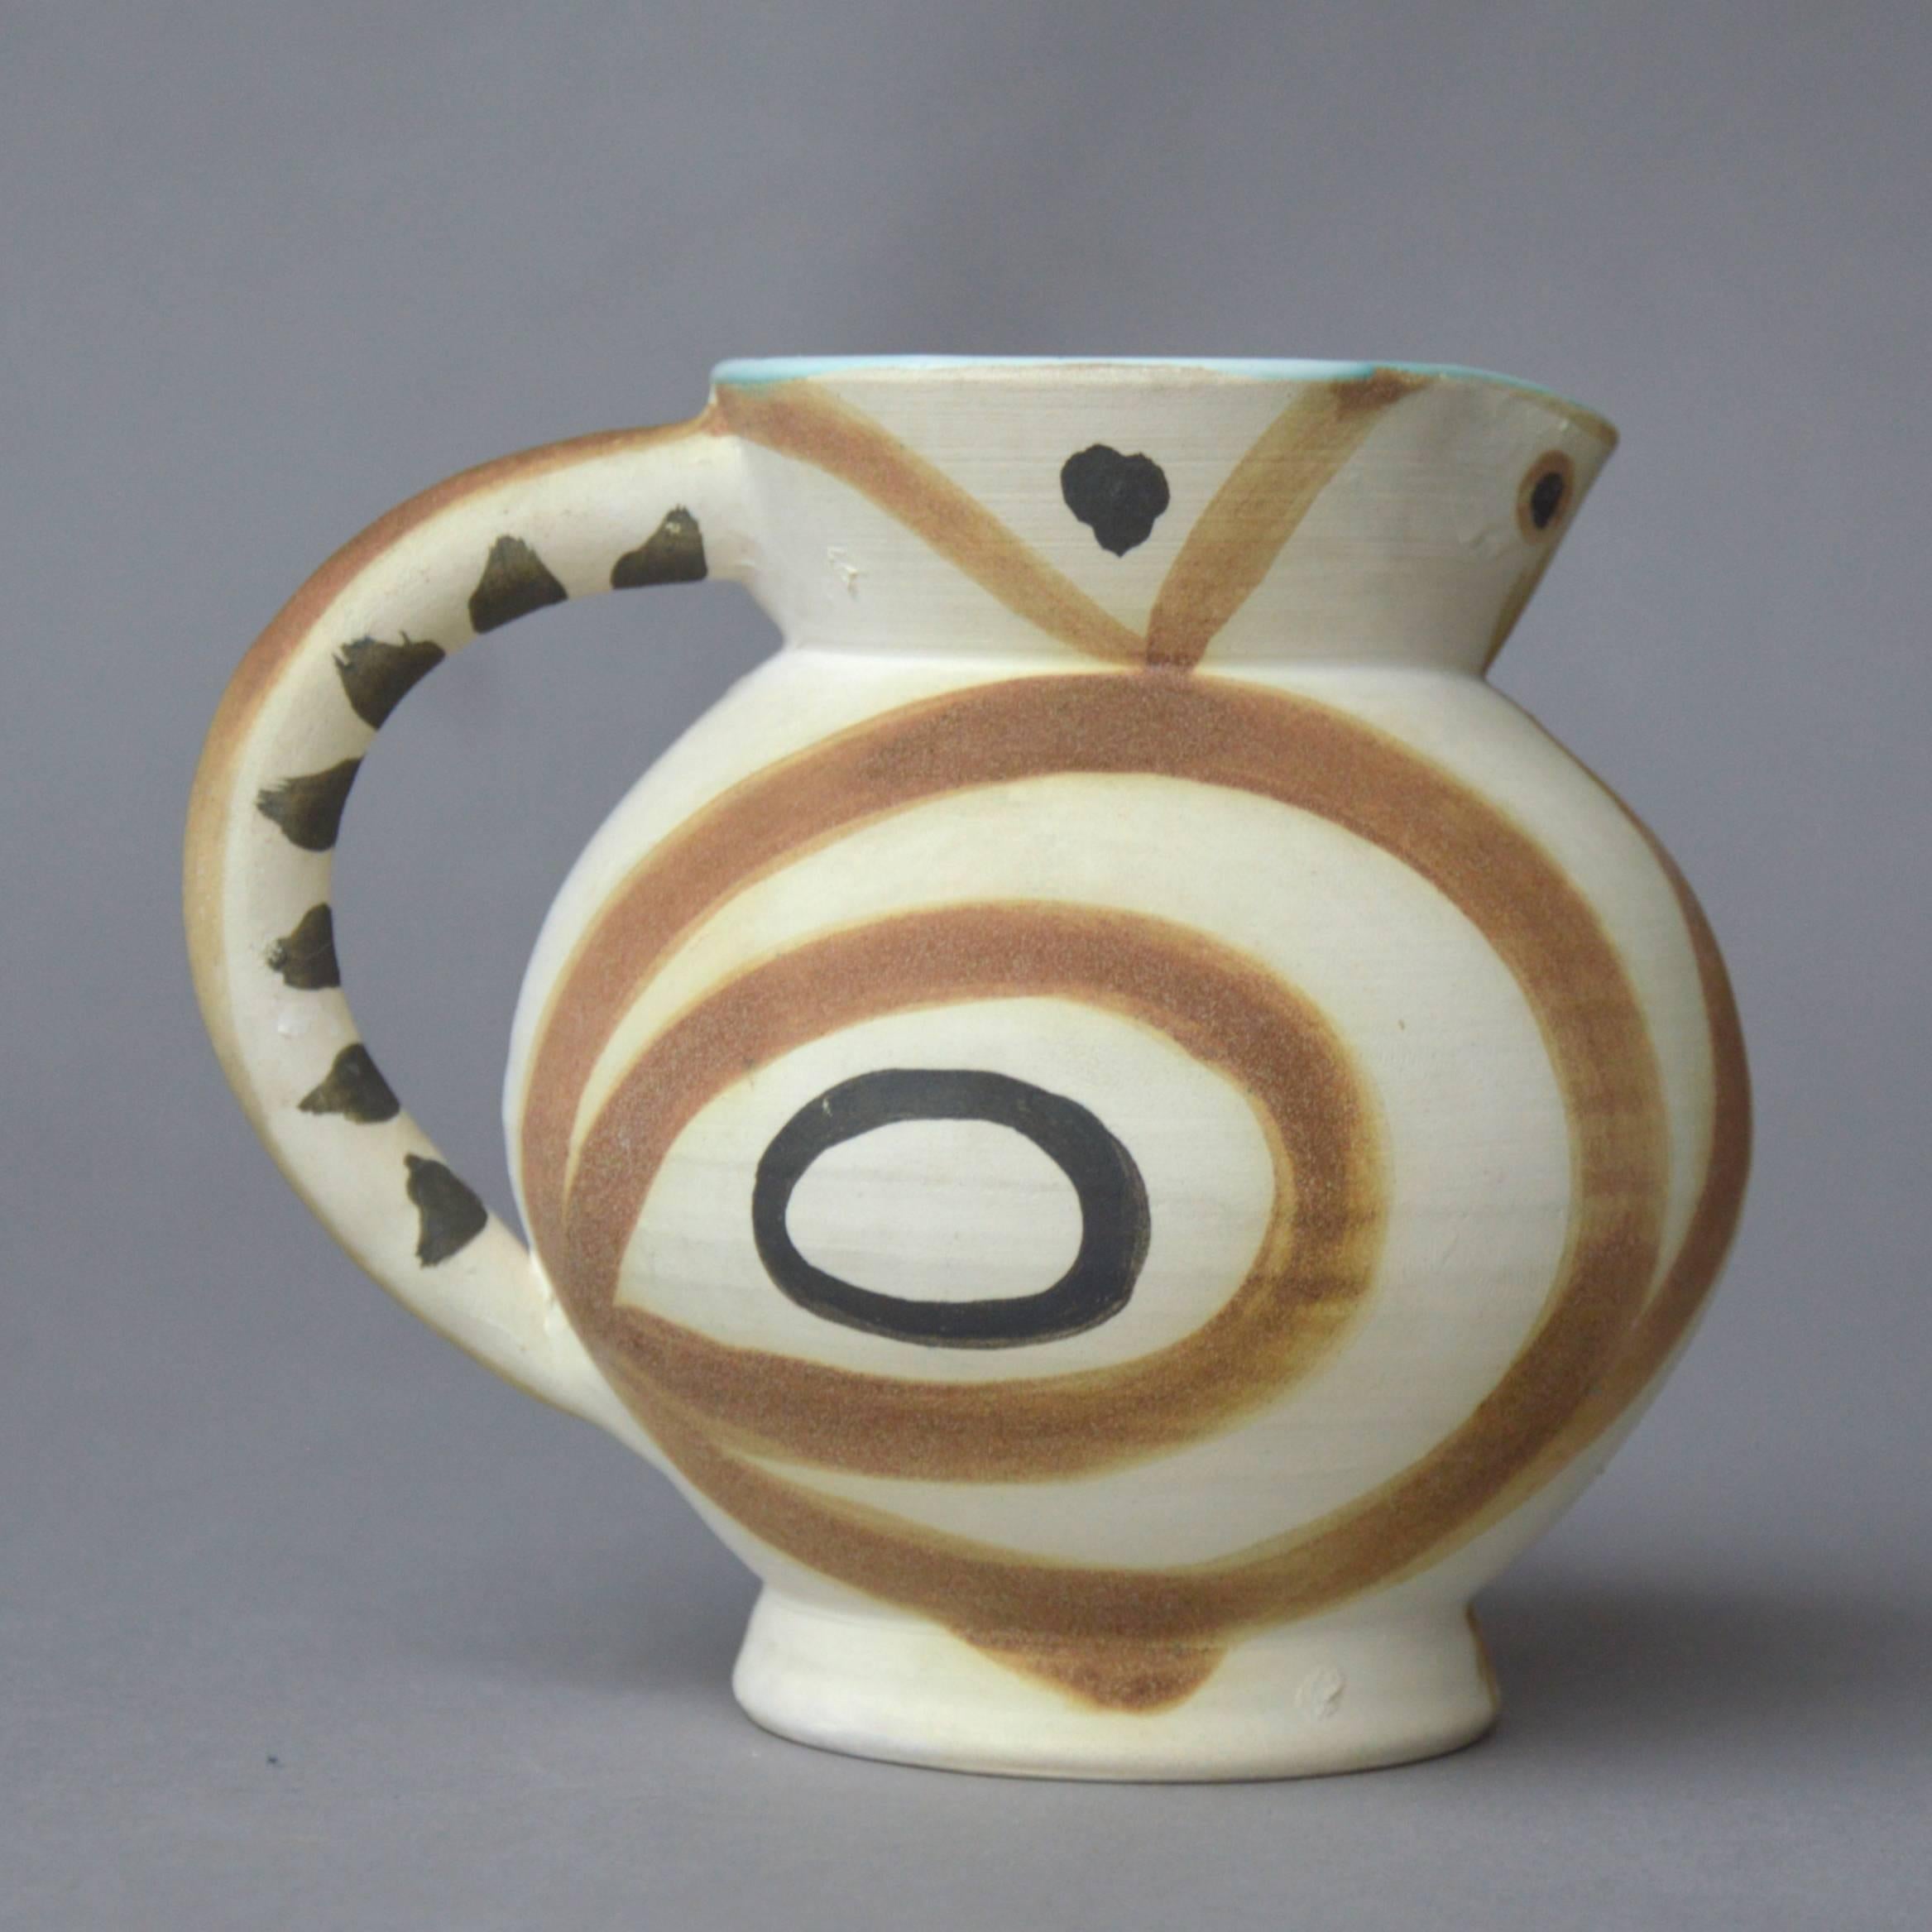 Turned Pablo Picasso Madoura Ceramic Pitcher Little Wood-Owl, 1949 For Sale